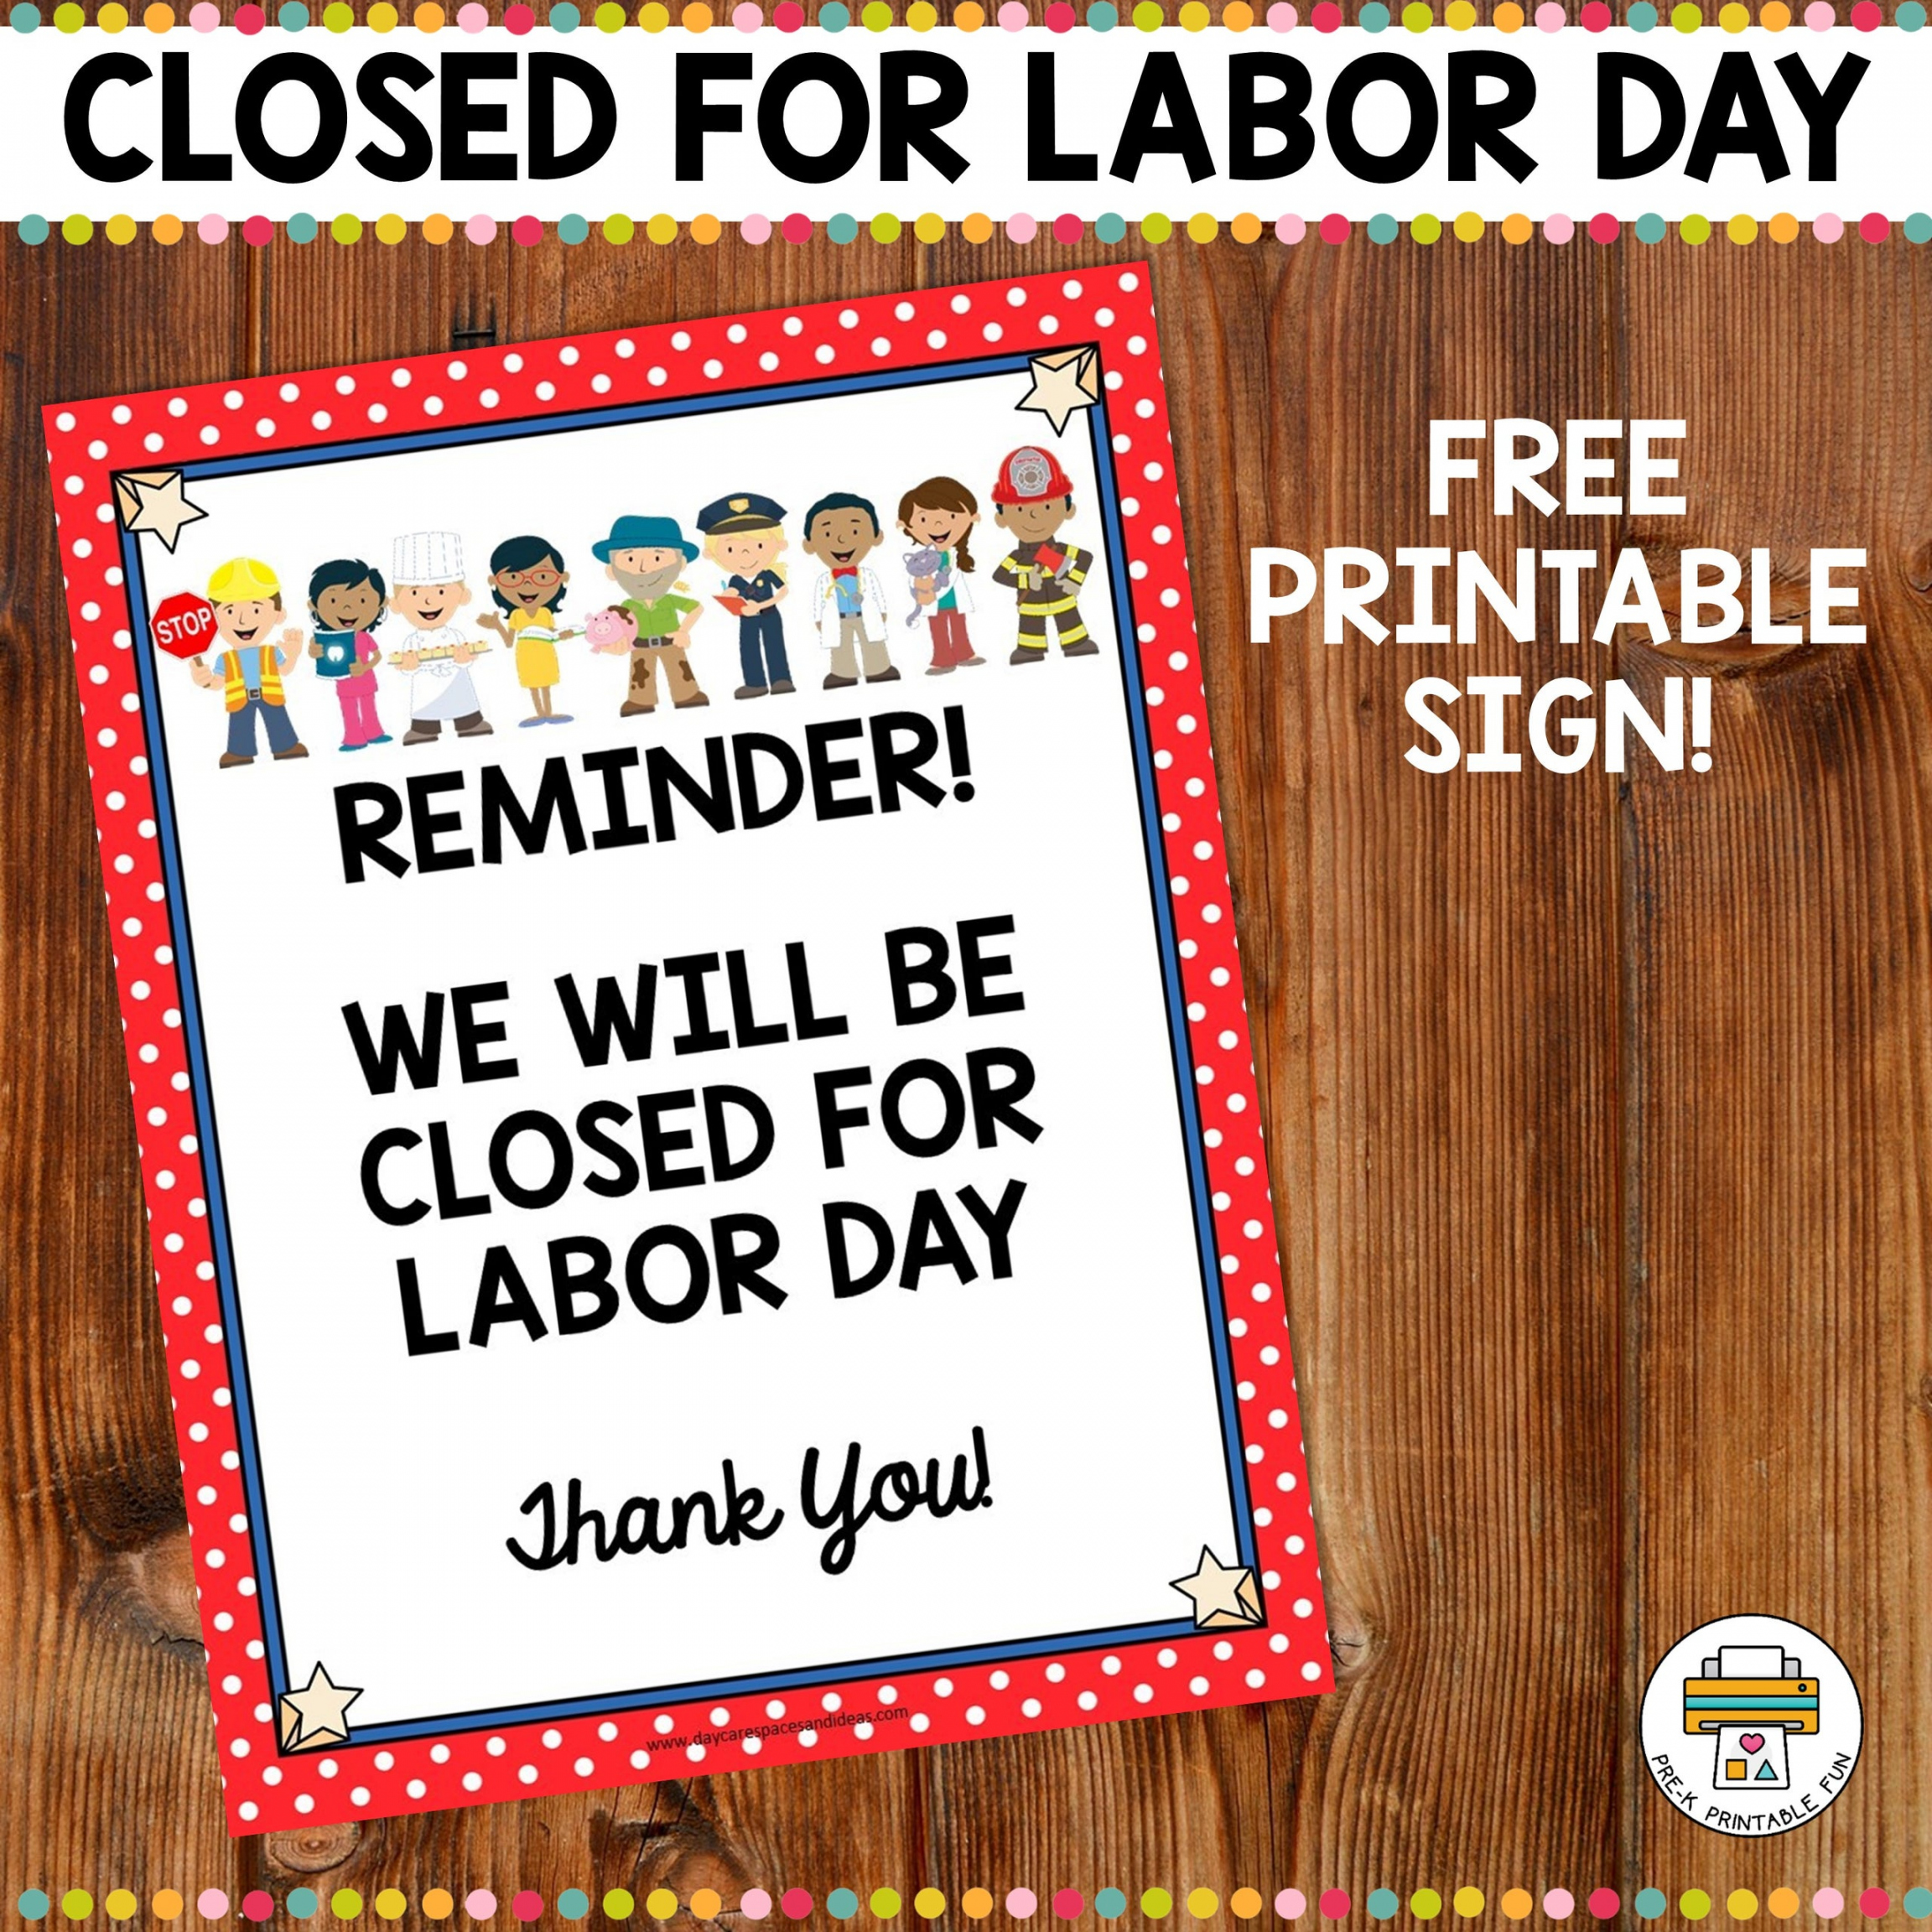 Labor Day Sign - FREE Printables - Free Printable Closed For Labor Day Signs